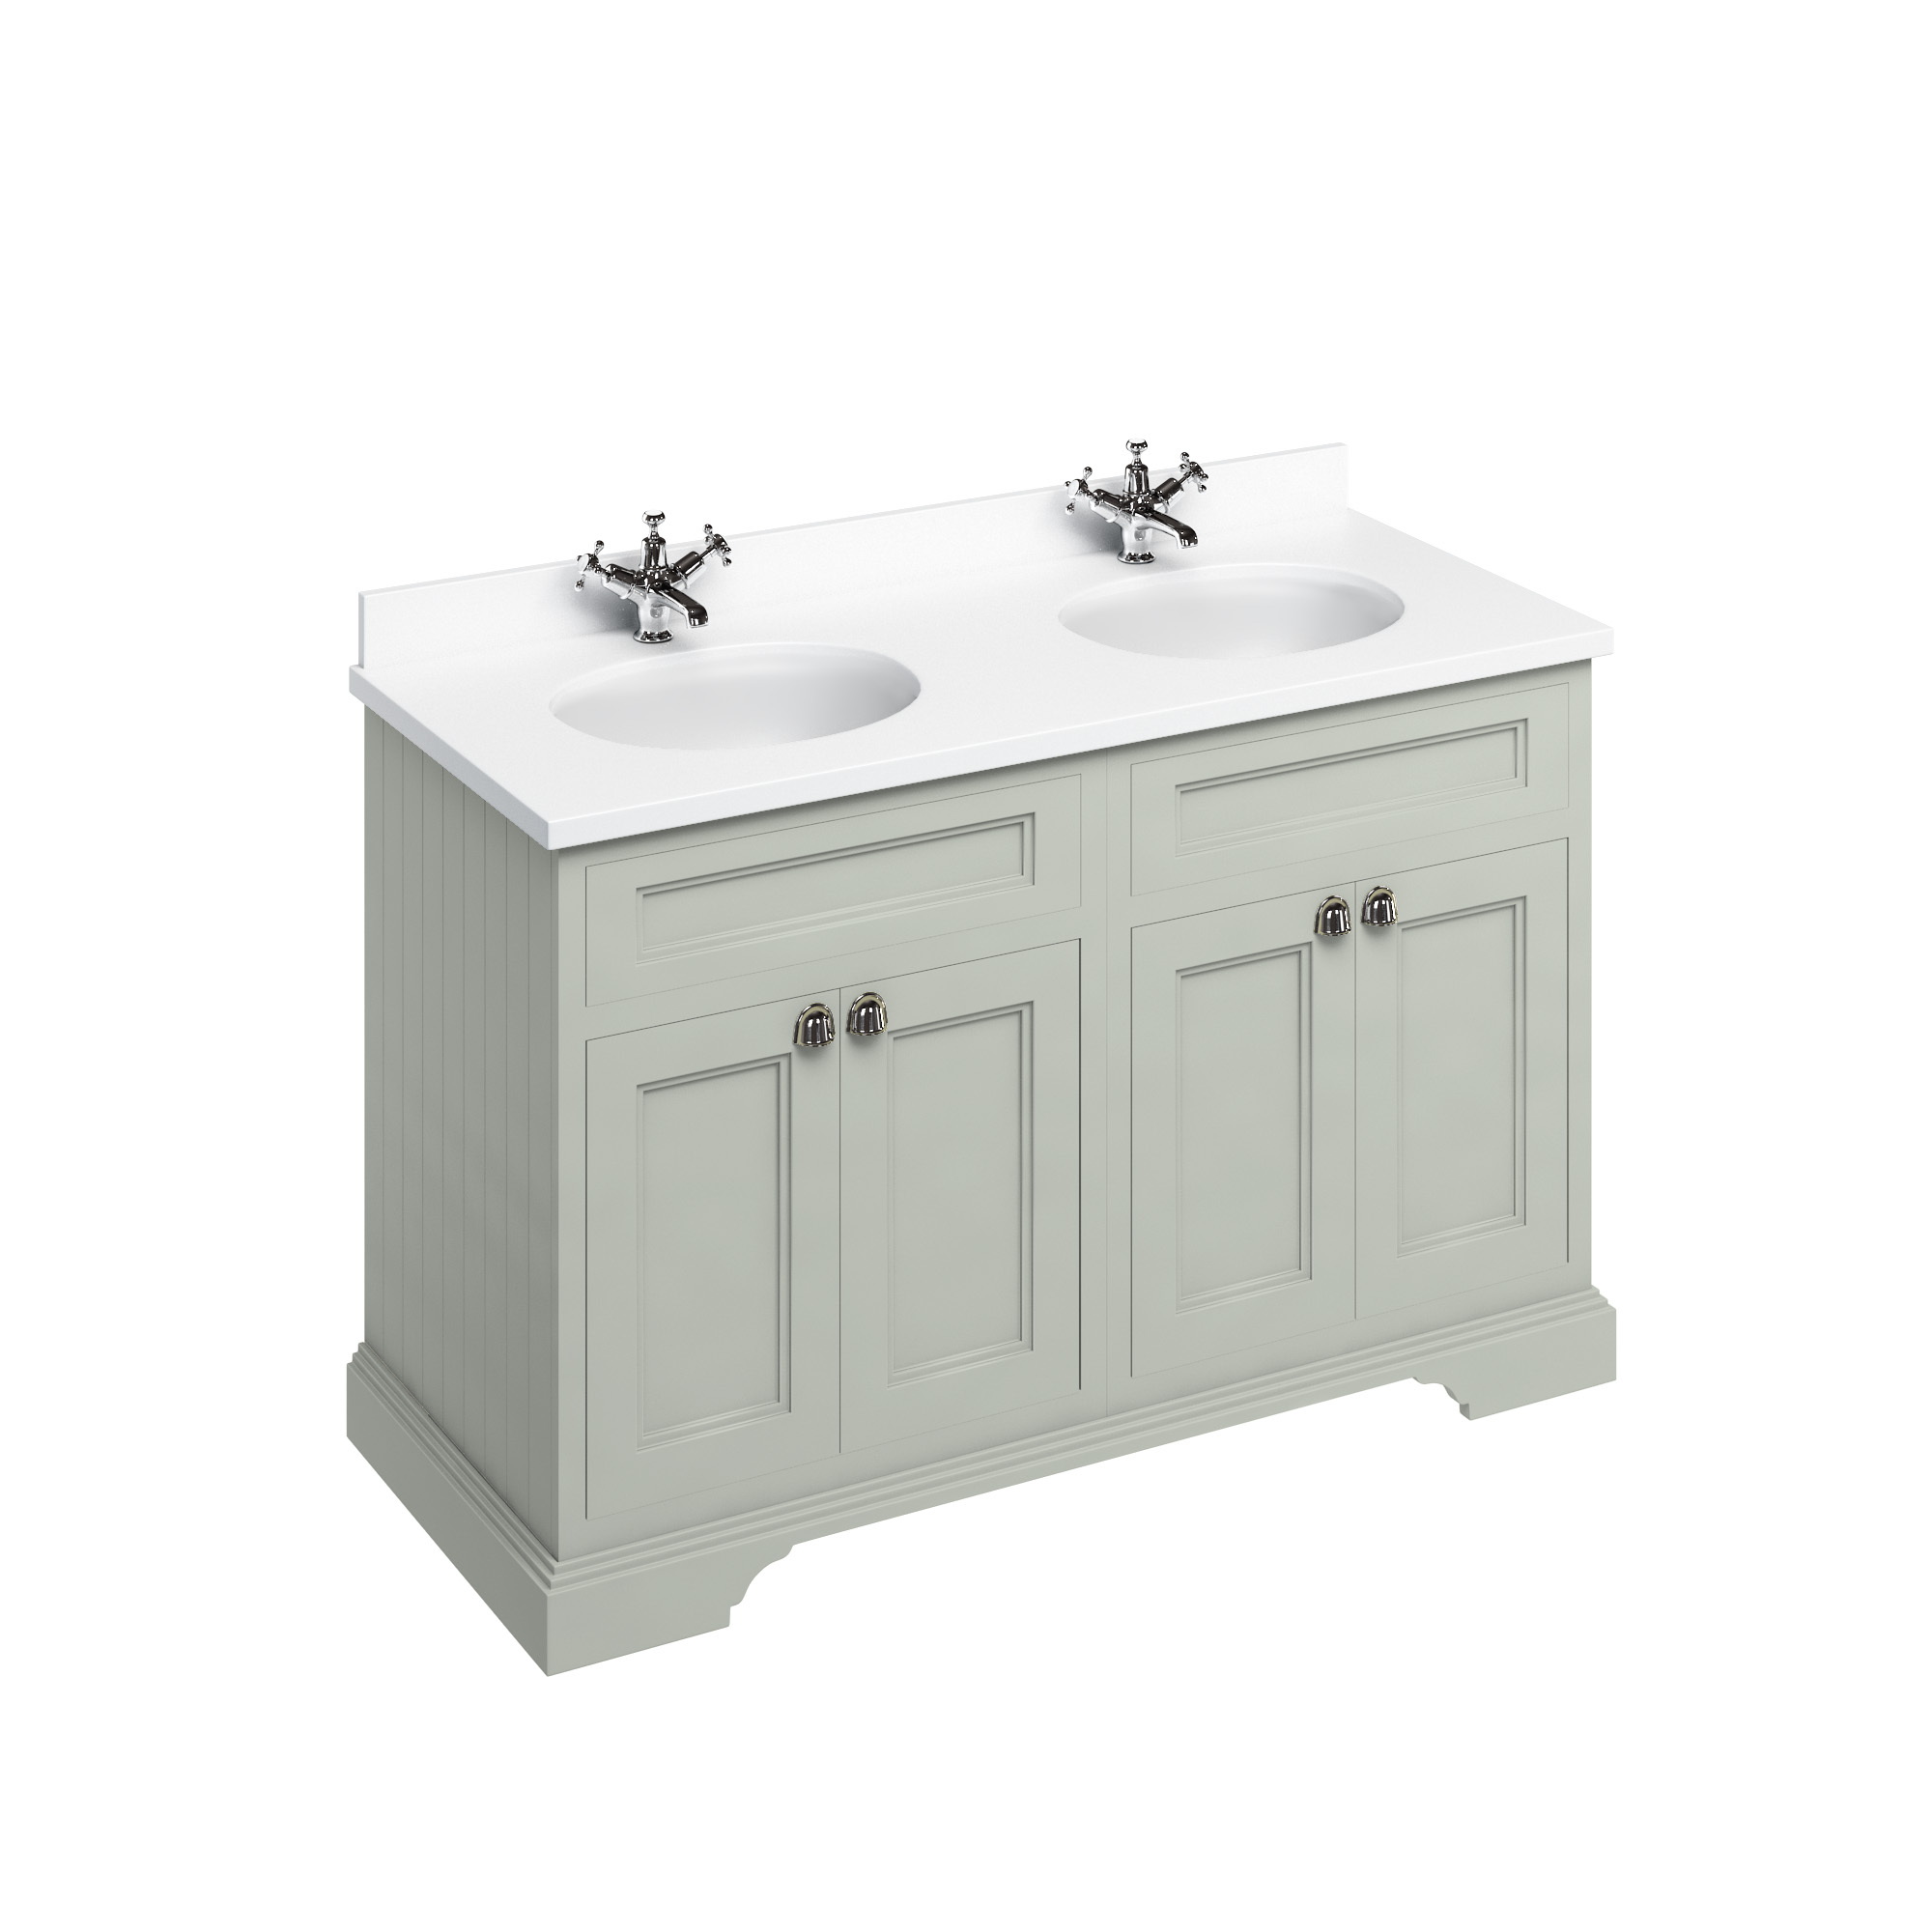 Freestanding 130 Vanity Unit with doors - Dark Olive and Minerva white worktop with two integrated white basins